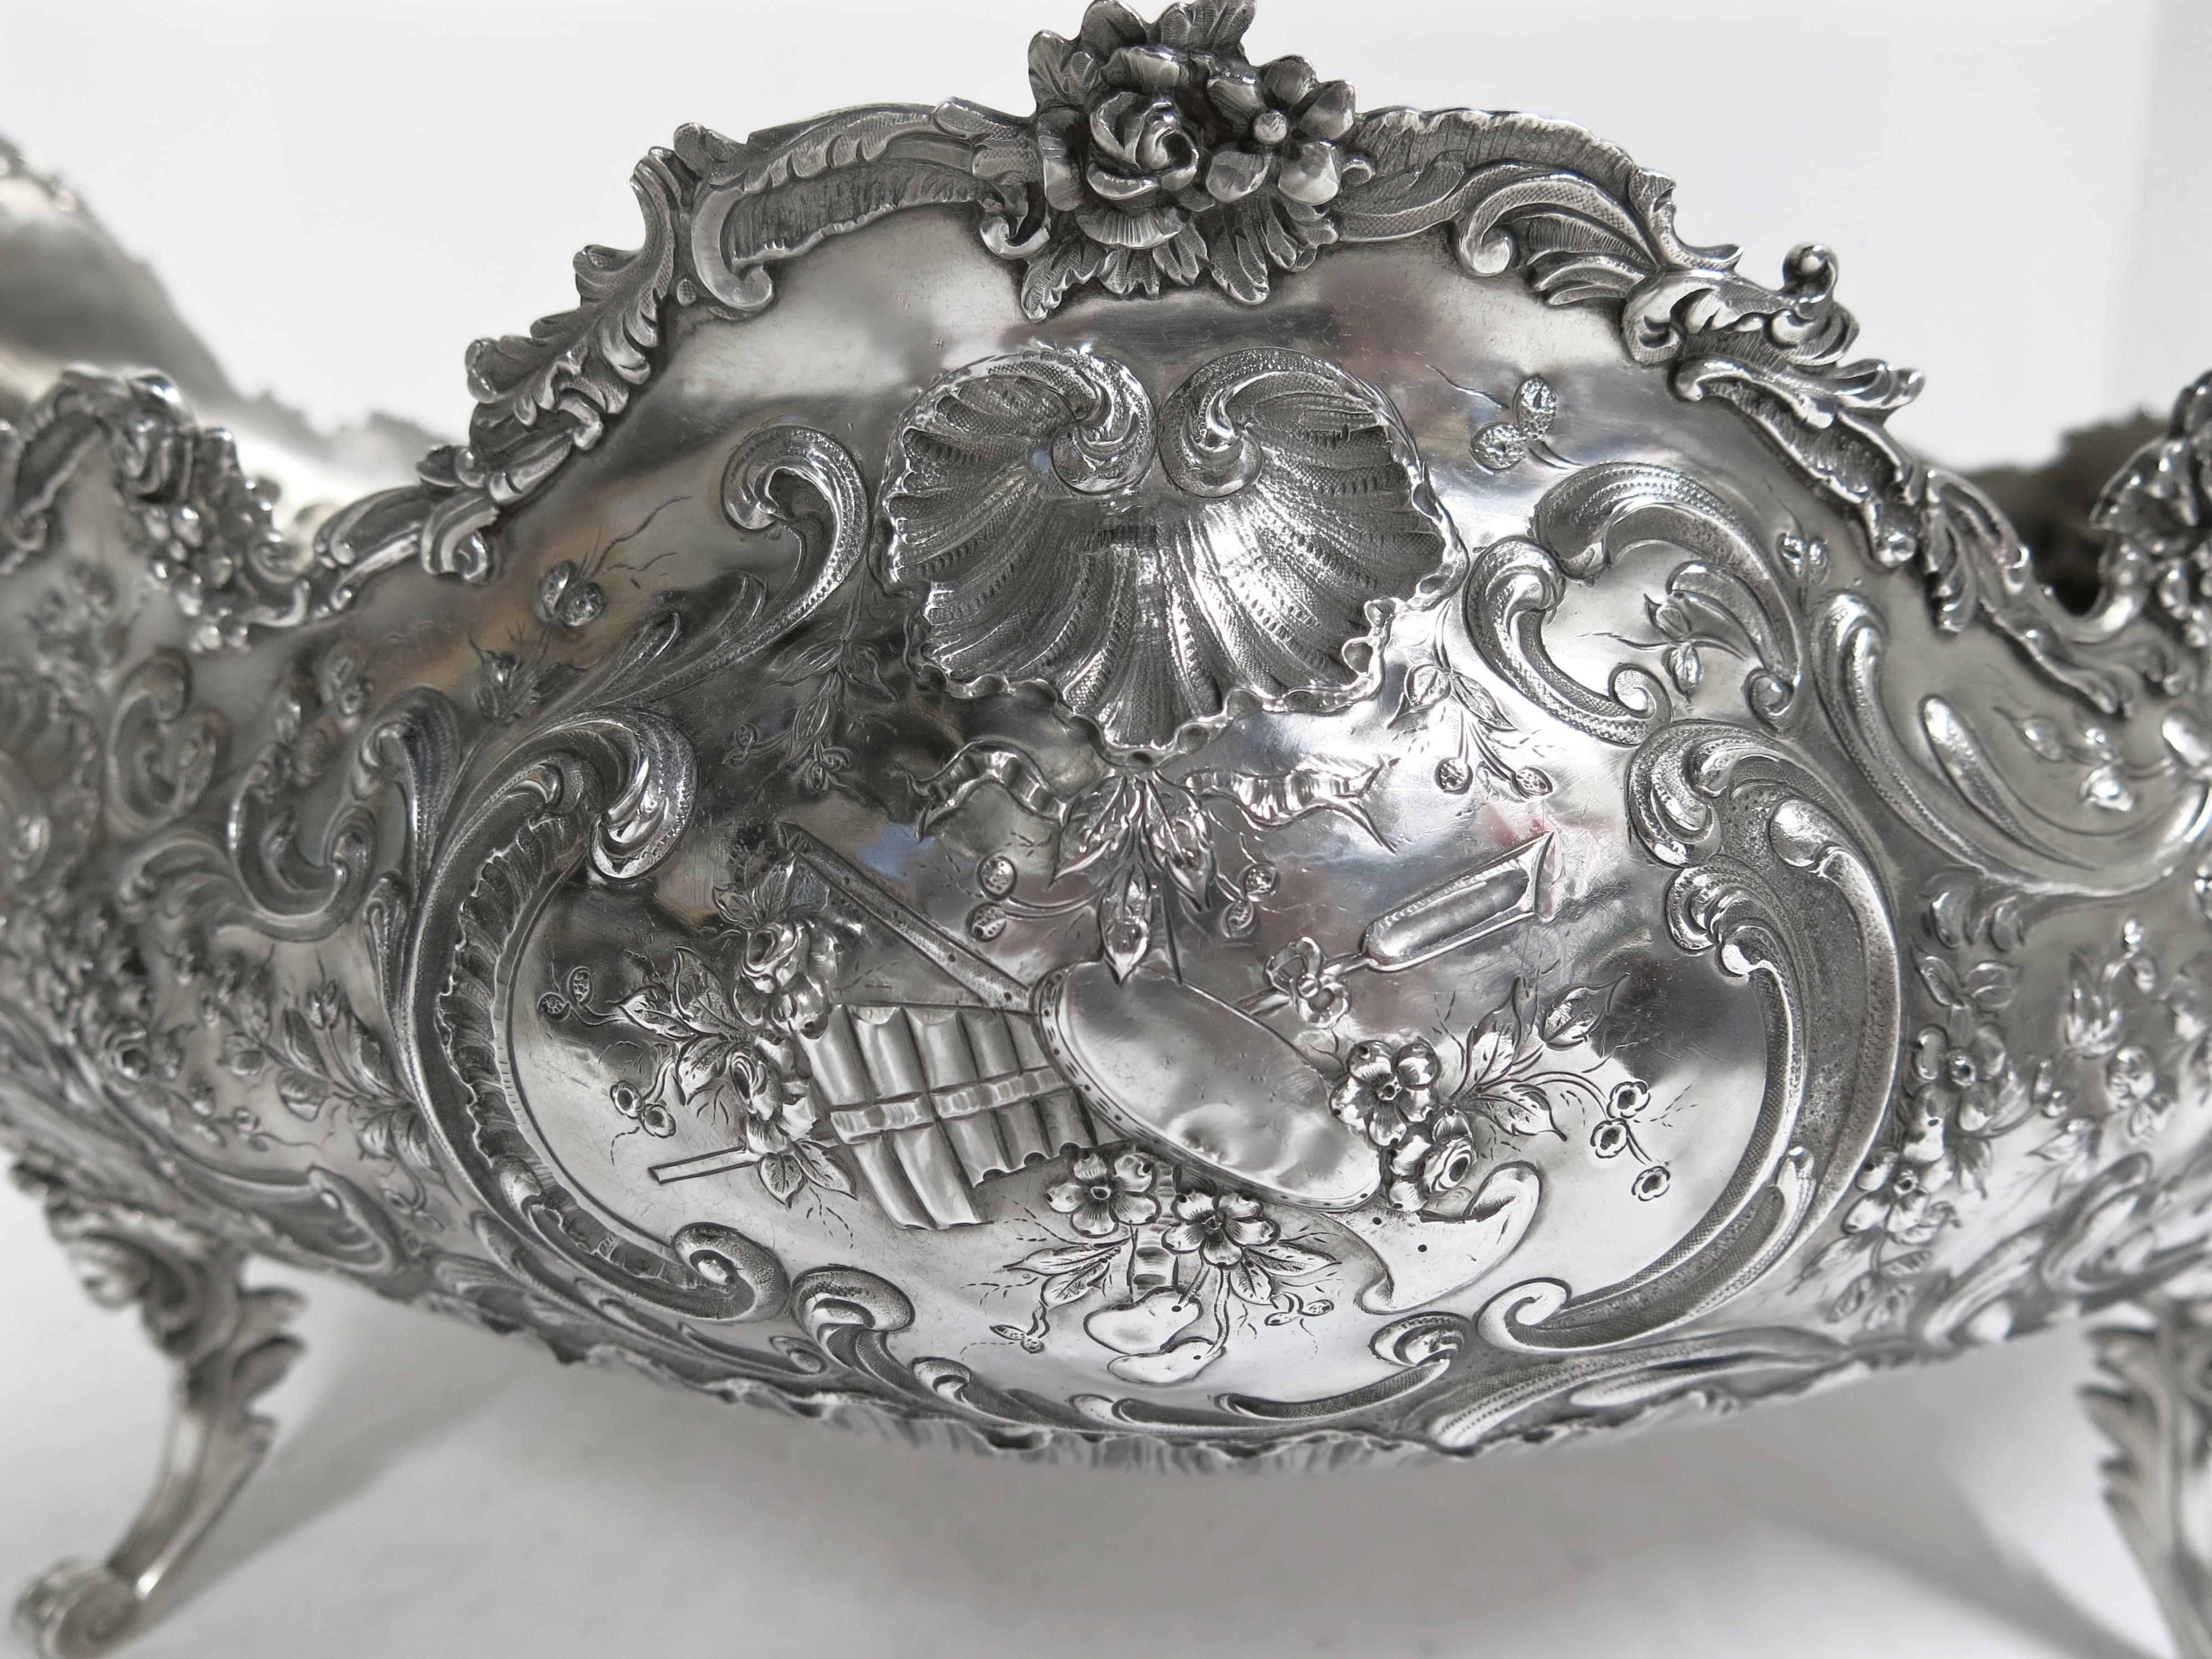 A large oval footed, beautifully hand chased centerpiece bowl made by the French Parisian silversmith Emile Delaire, circa 1890s.
The centerpiece measures 21.50